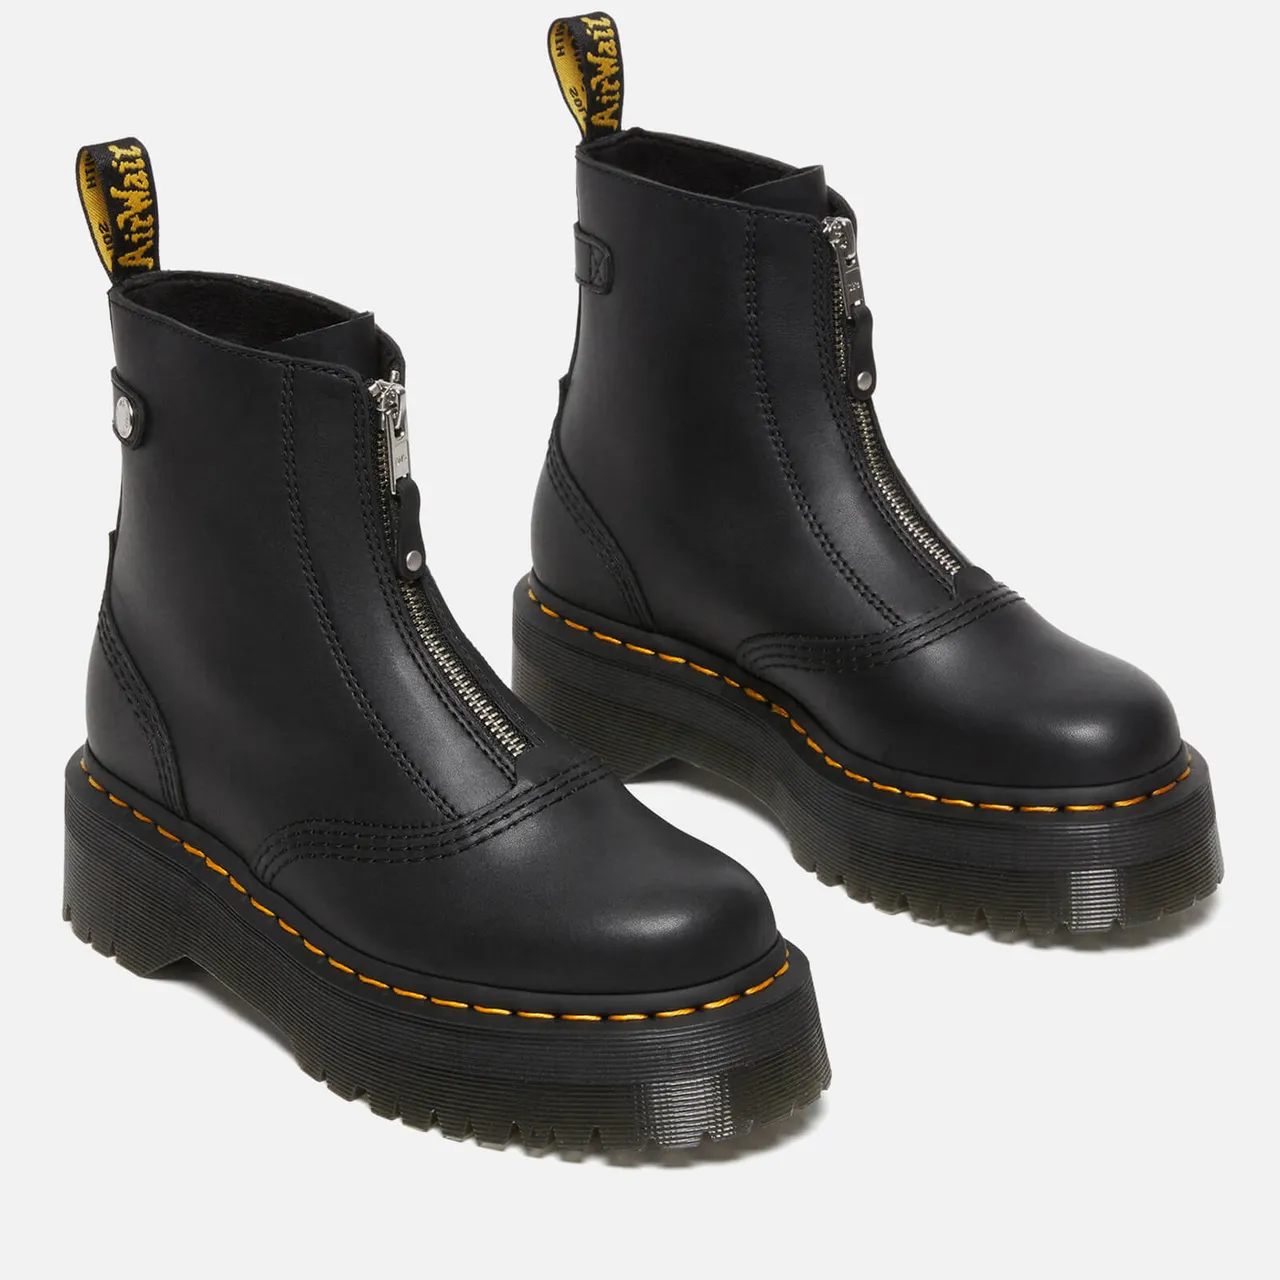 Dr. Martens Jetta Zip Front Leather Boots - UK